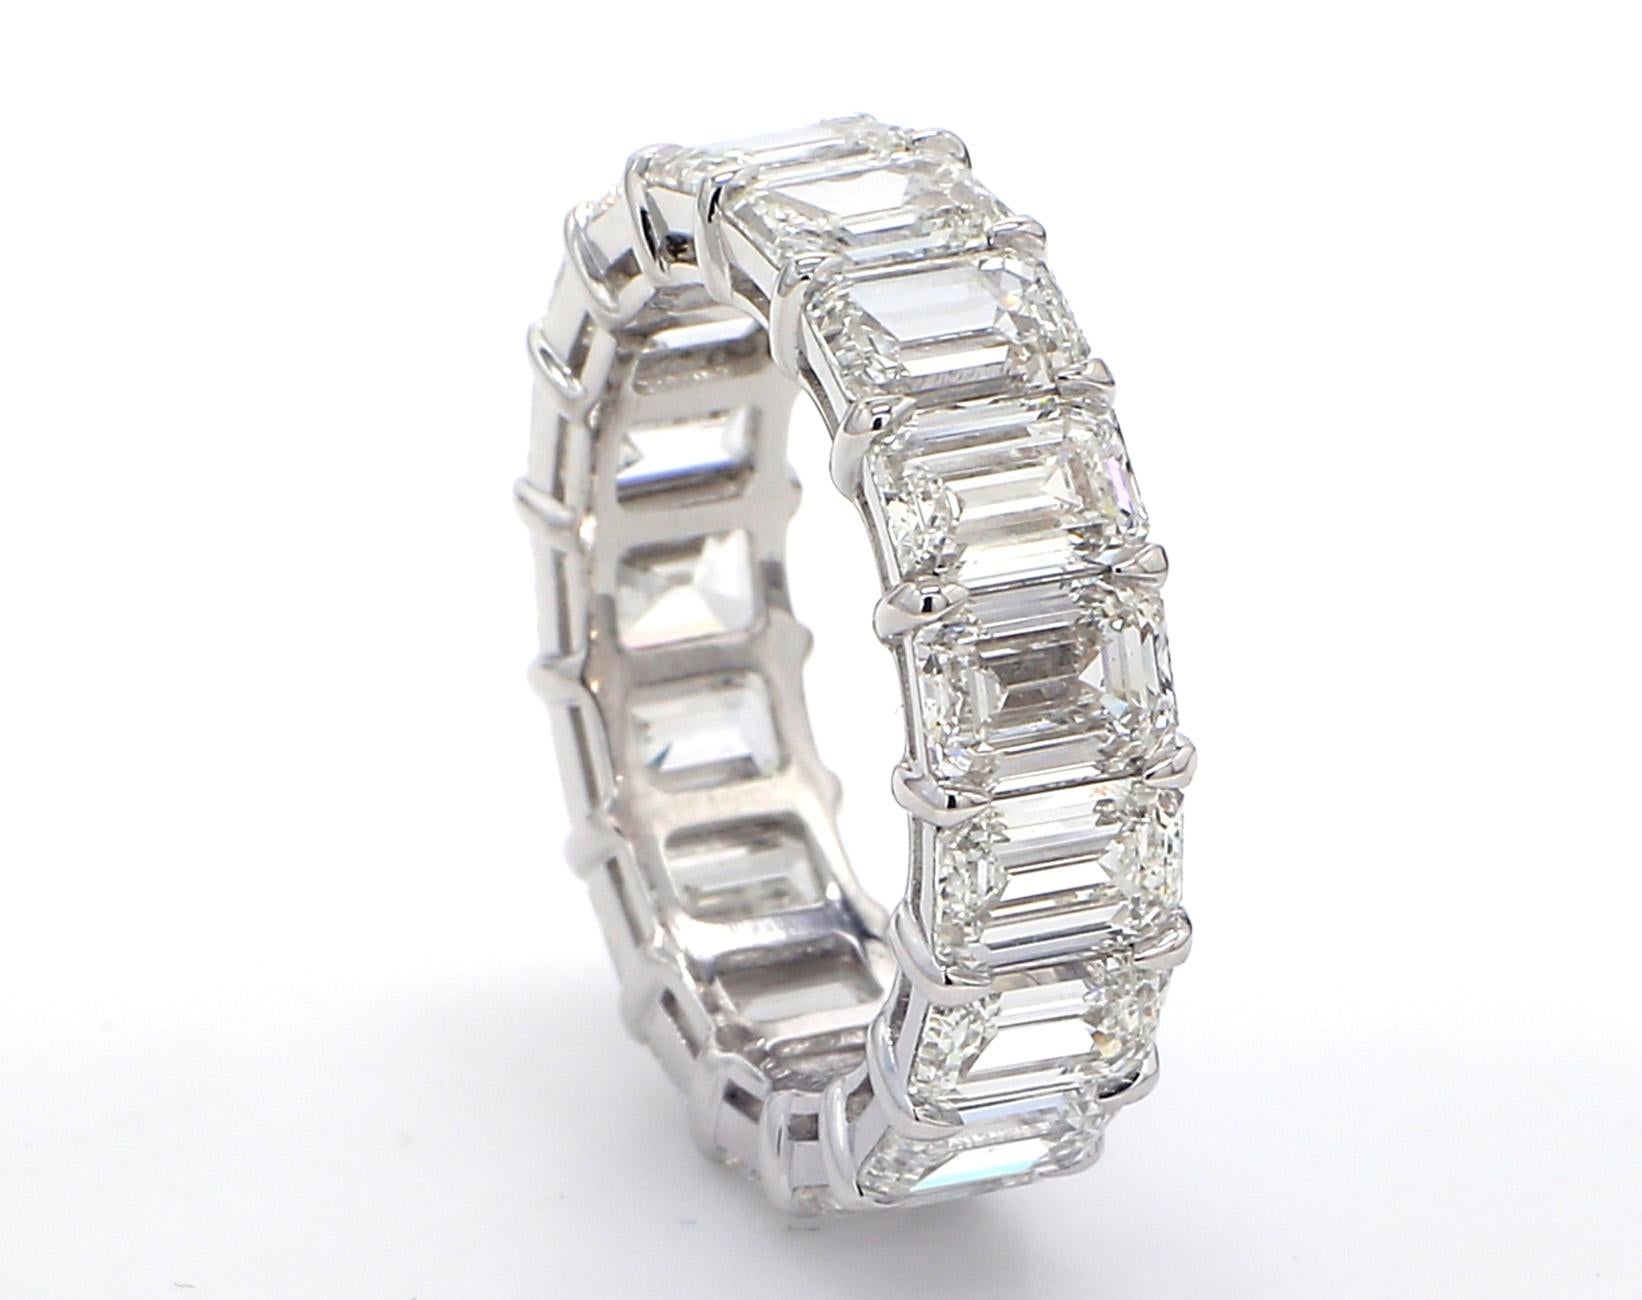 Women's Eternity Band in Platinum with GIA G-H/VVS2-VS2 Emerald Cut Diamonds. D8.57ct. For Sale